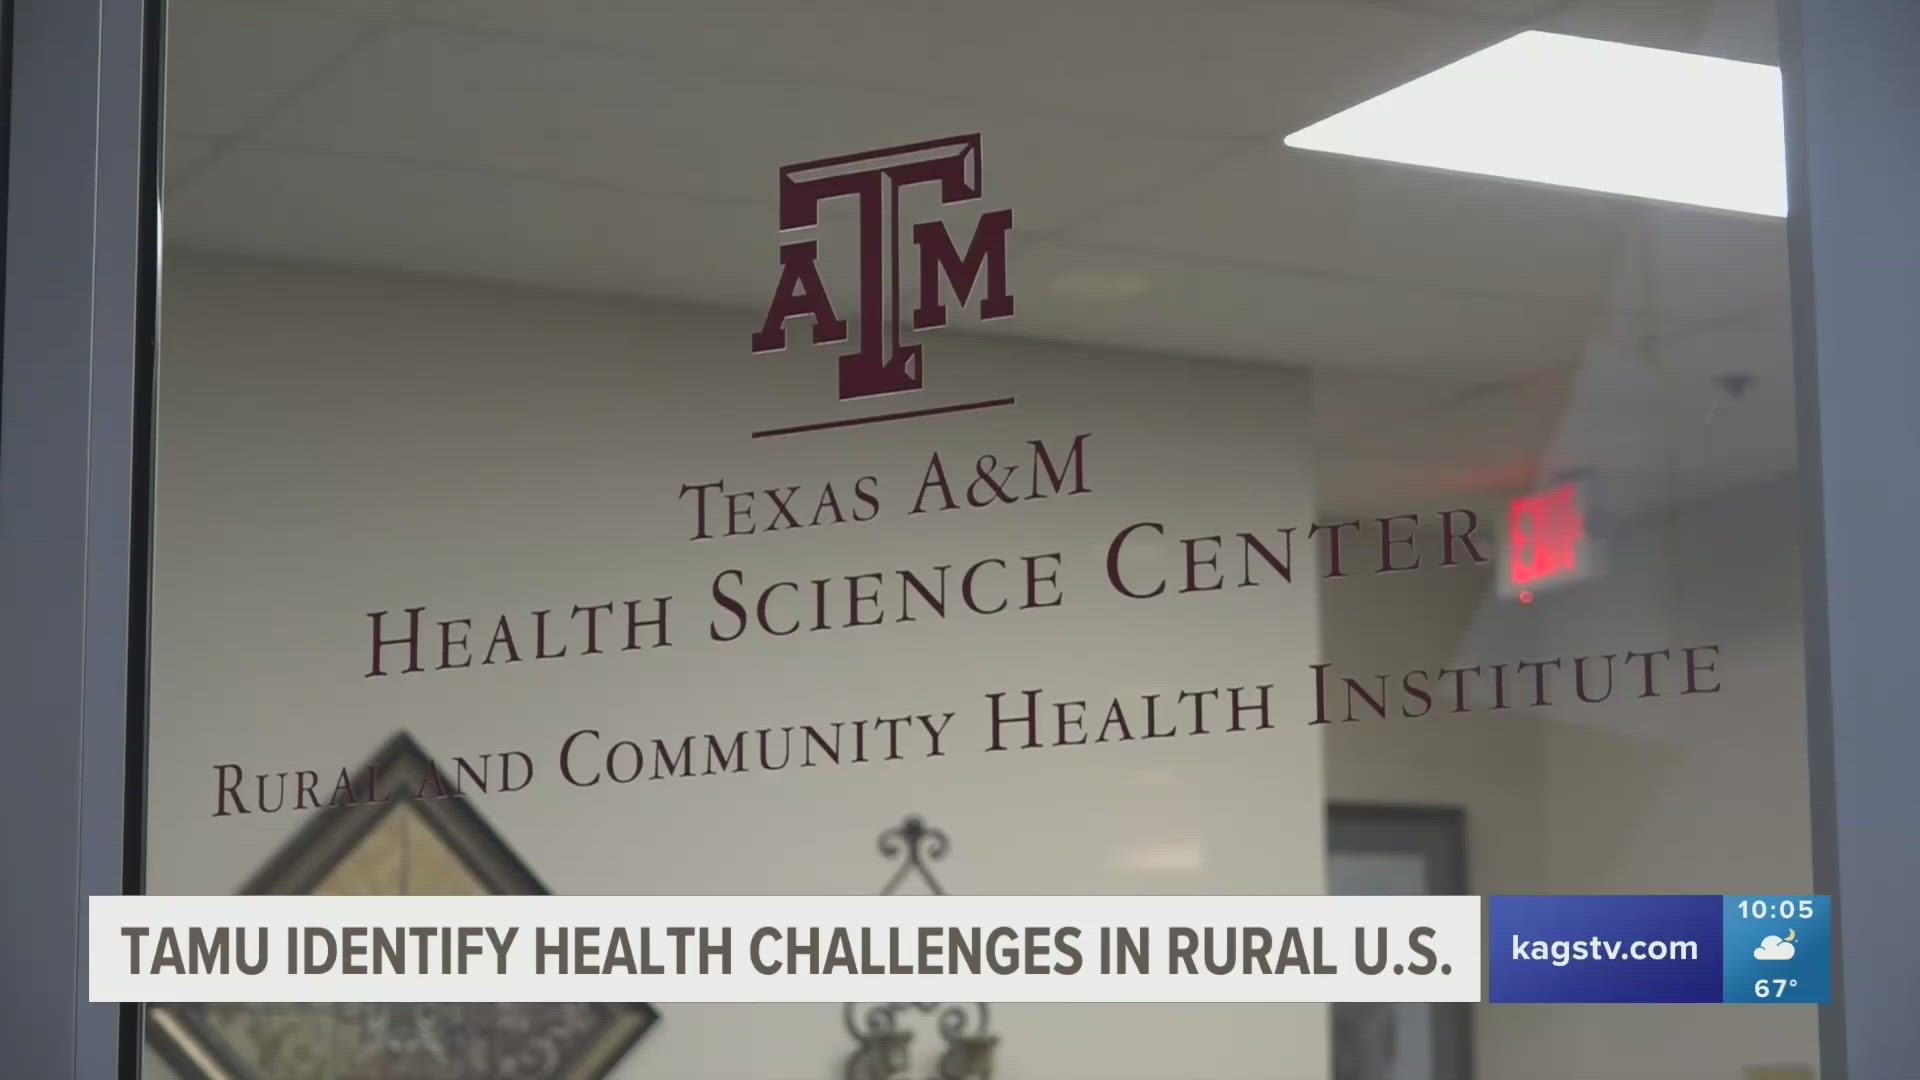 Southwest Rural Health Research Center at Texas A&M identify health challenges in rural United States